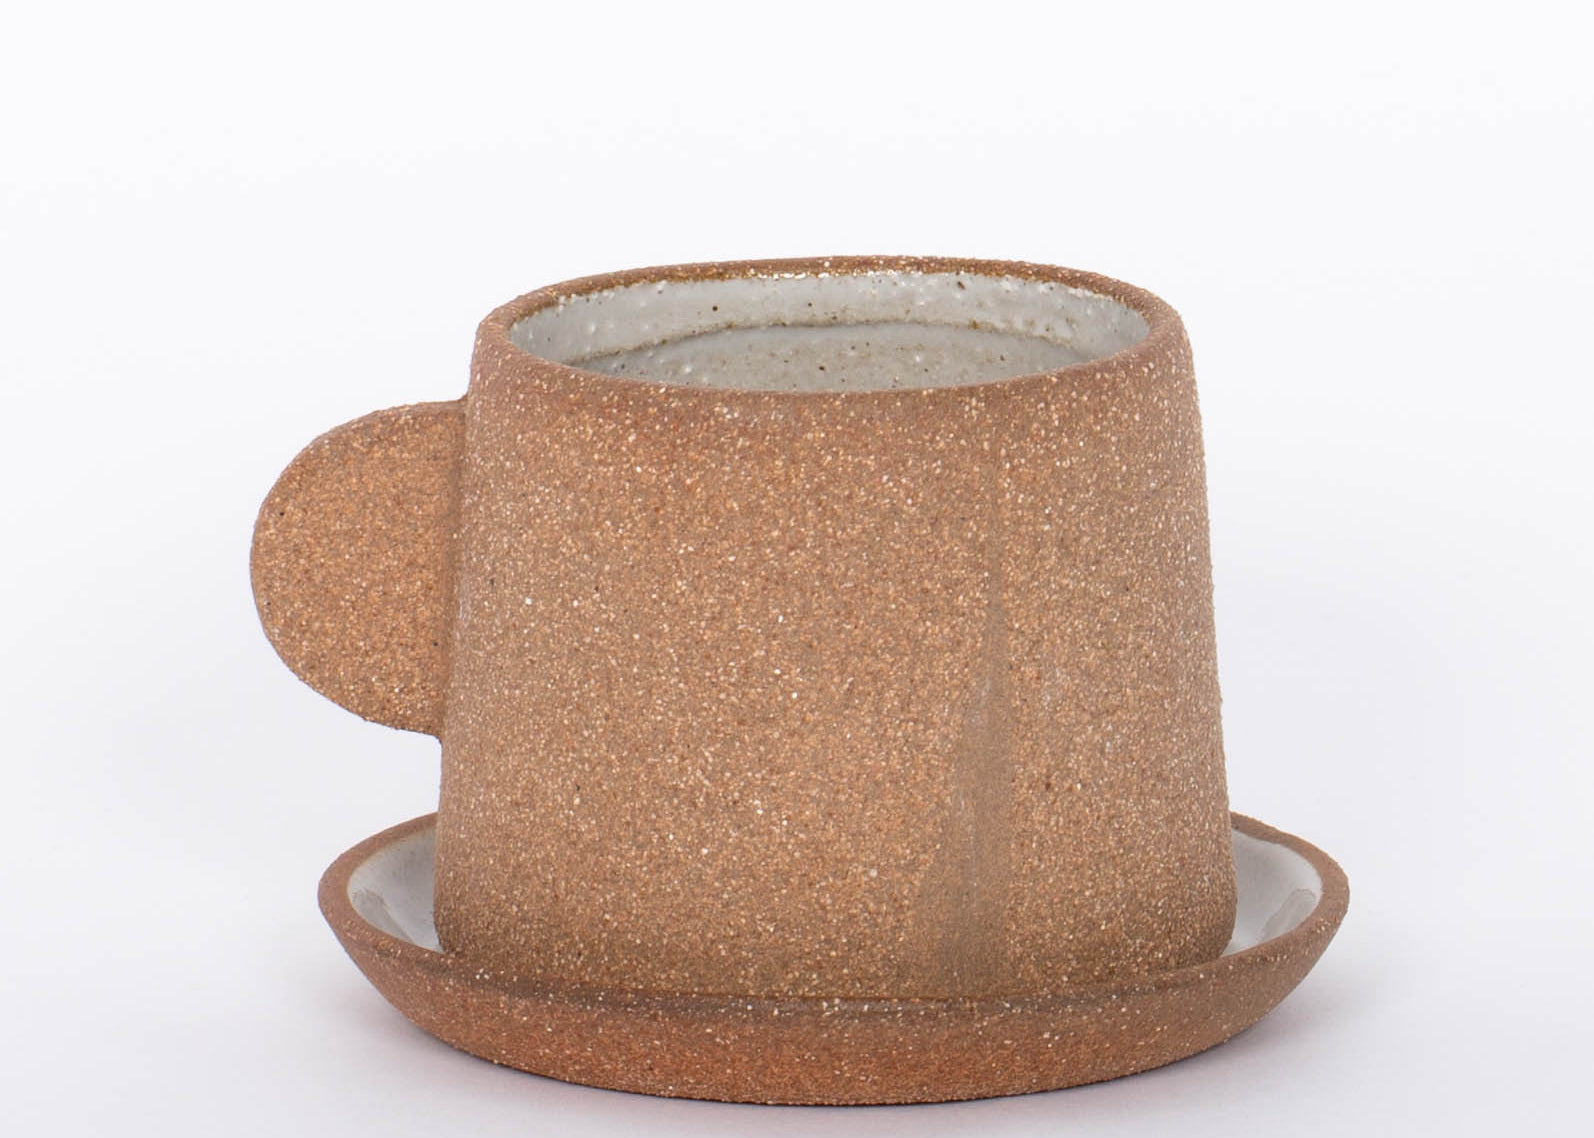 Canyon Clay Cup and Saucer with small handle by Citrine made from exposed reddish-brown earthenware and finished with a thin off-white glaze. 